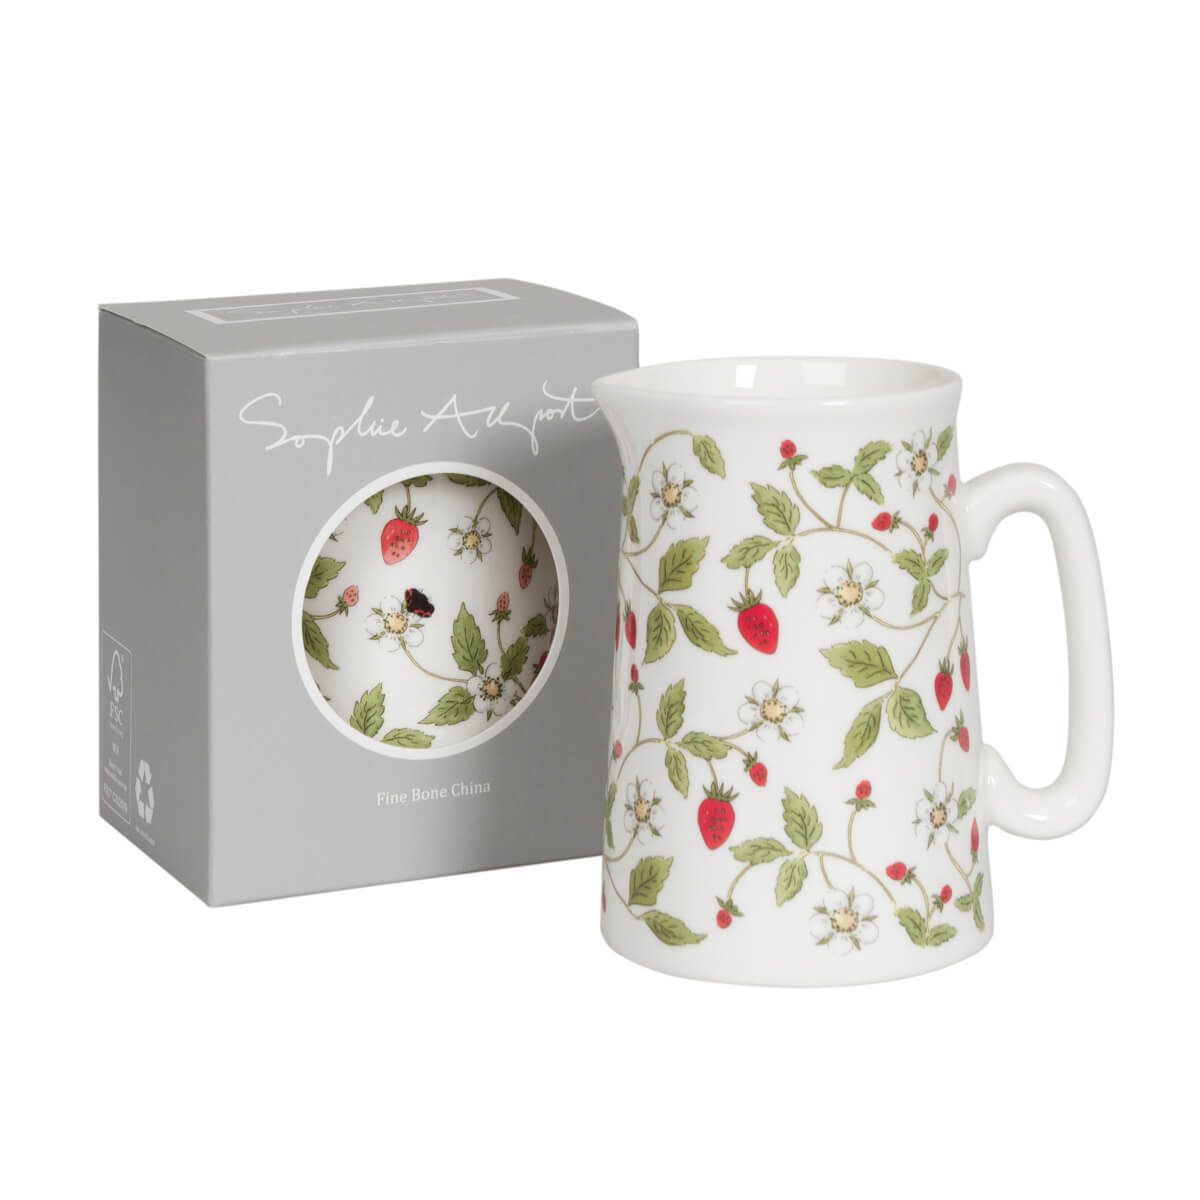 Strawberries Jug - Small with Gift Box by Sophie Allport